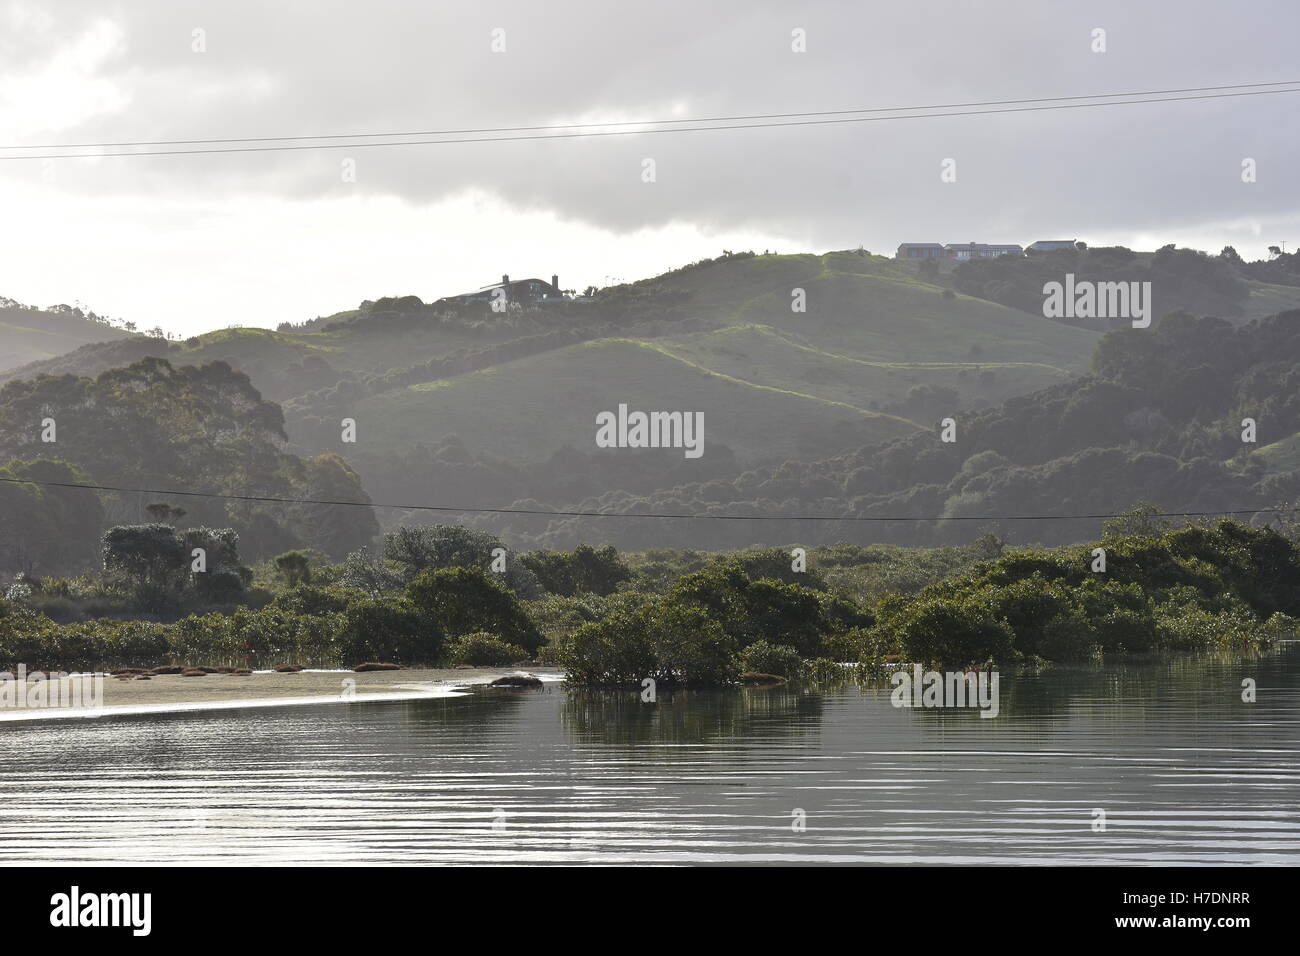 Mangroves of a calm estuary with hills in the background. Stock Photo